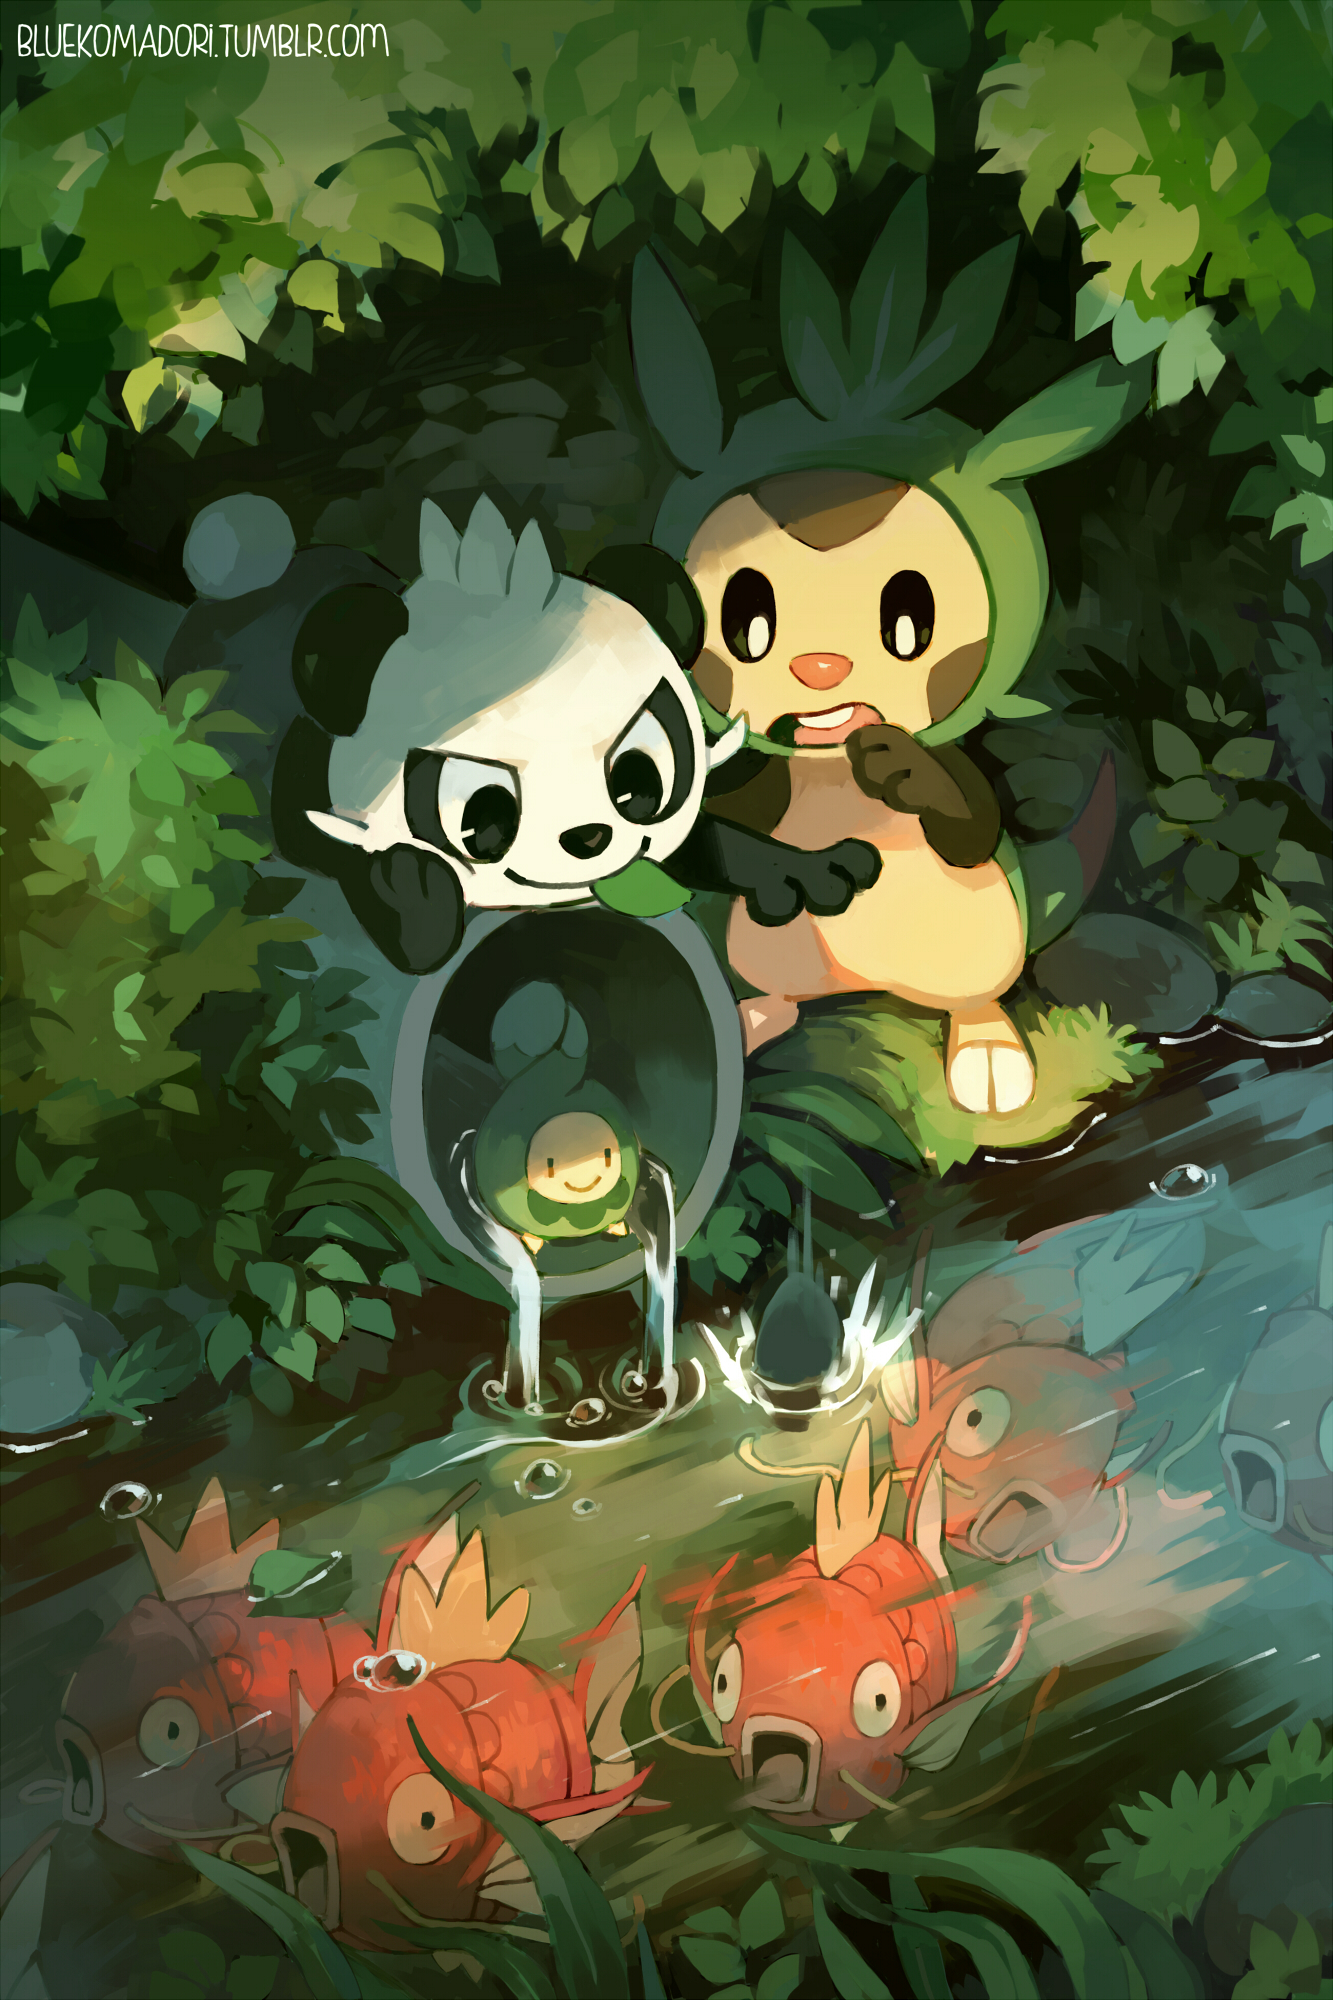 Pancham and Chespin